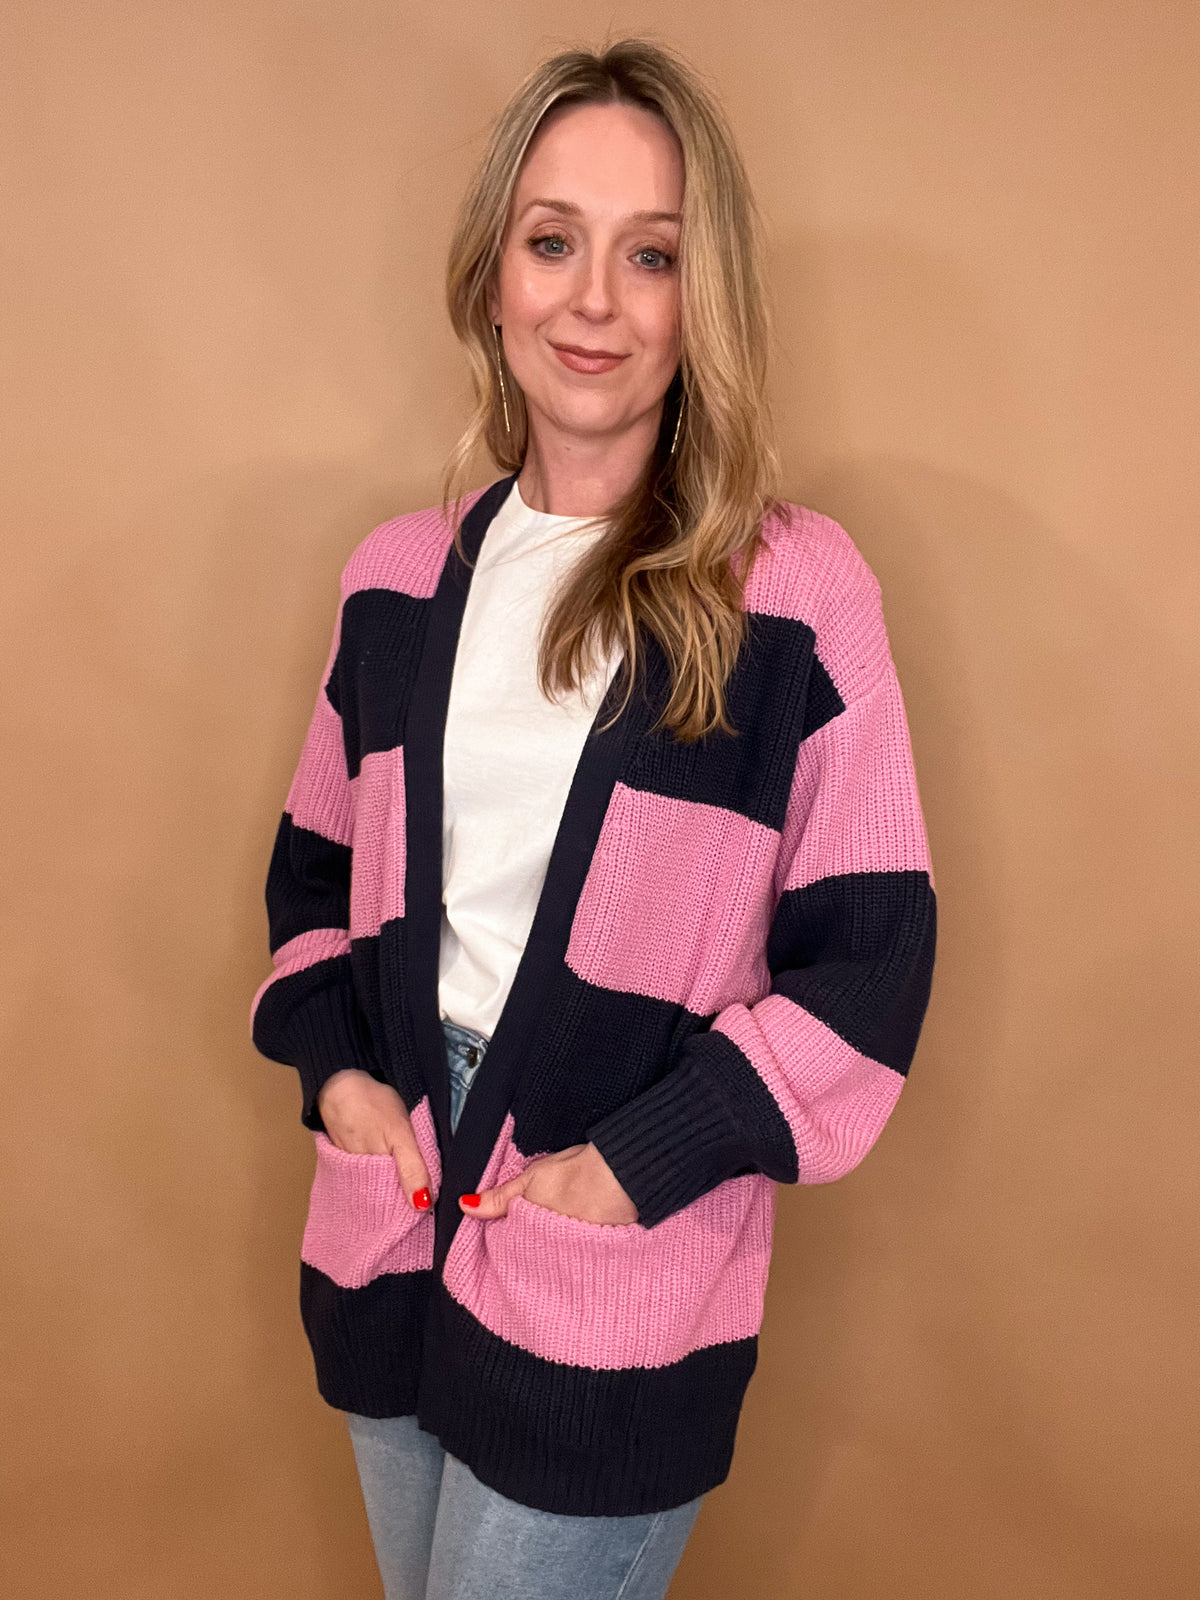 Indulge in the cozy yet stylish Spring Fever Cardigan. With its lilac and navy color scheme, medium chunky knit, and clean front plackets, this cardigan will keep you warm during winter while also being perfect for spring. Plus, the open pockets add a convenient touch. Stay fashionable and comfortable all year round.